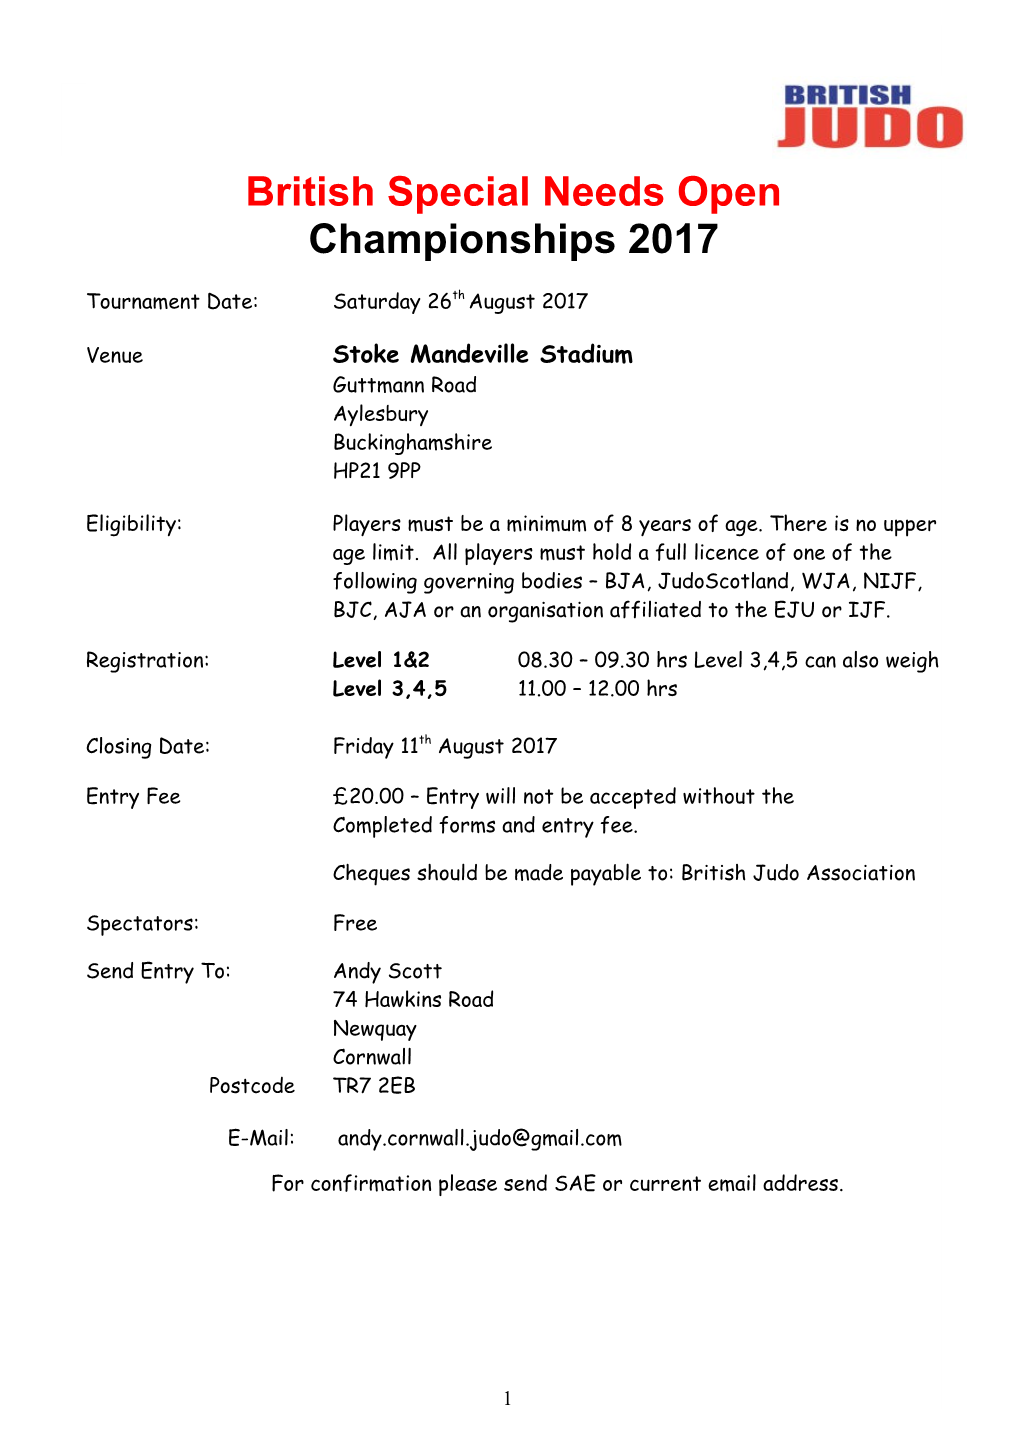 British Special Needs Open Championships 2017